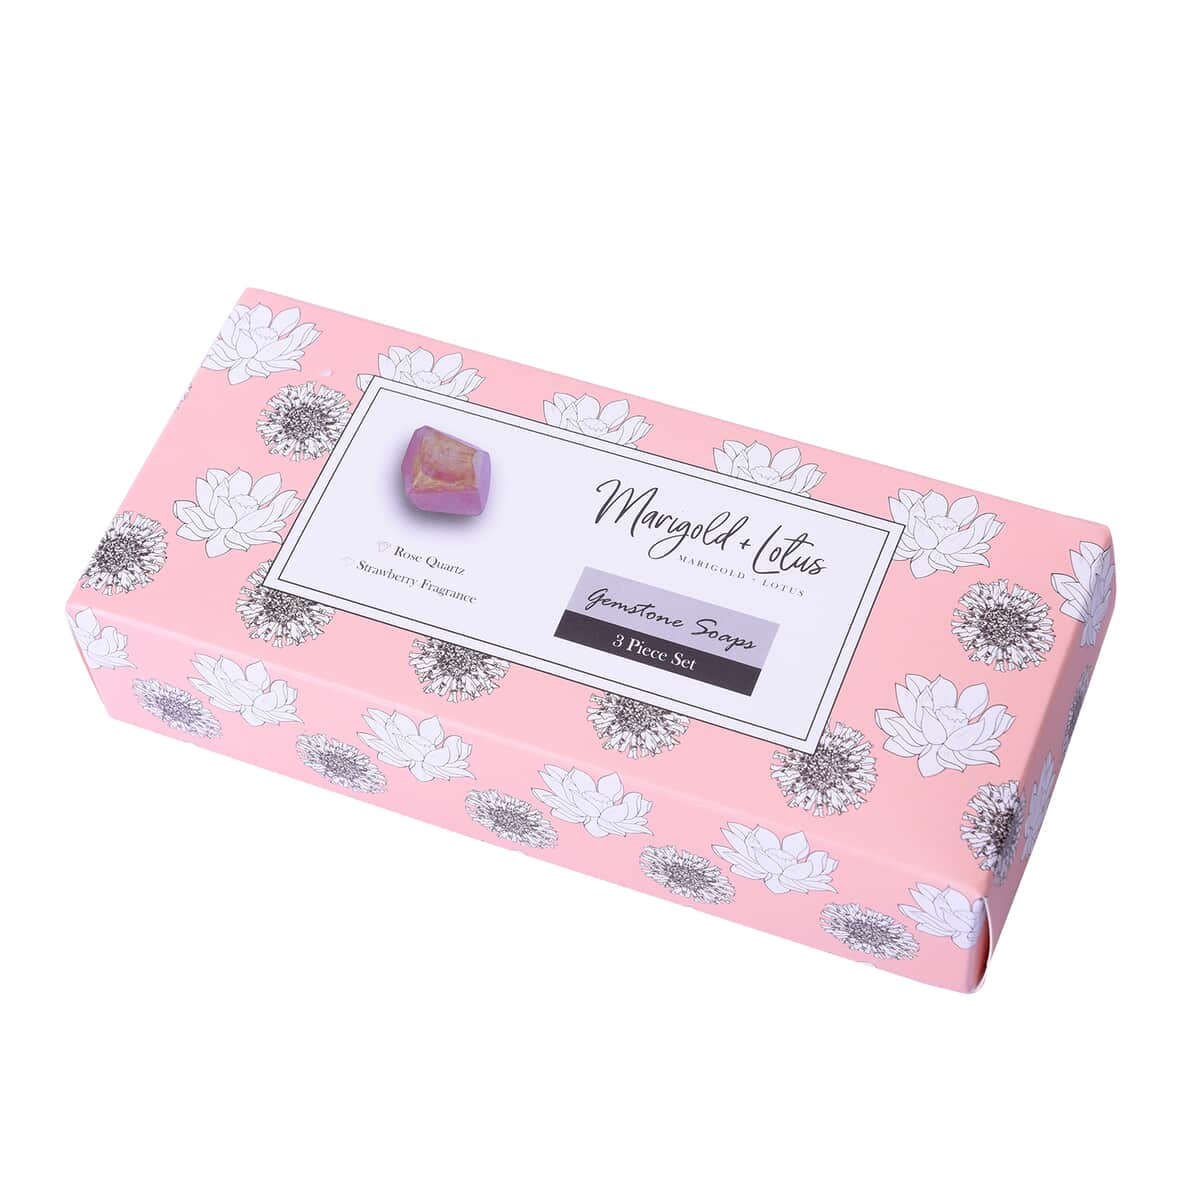 MARIGOLD & LOTUS 3pc Set Rose Quartz Soap Rock with Crystal Infused and Strawberry Fragrance image number 4